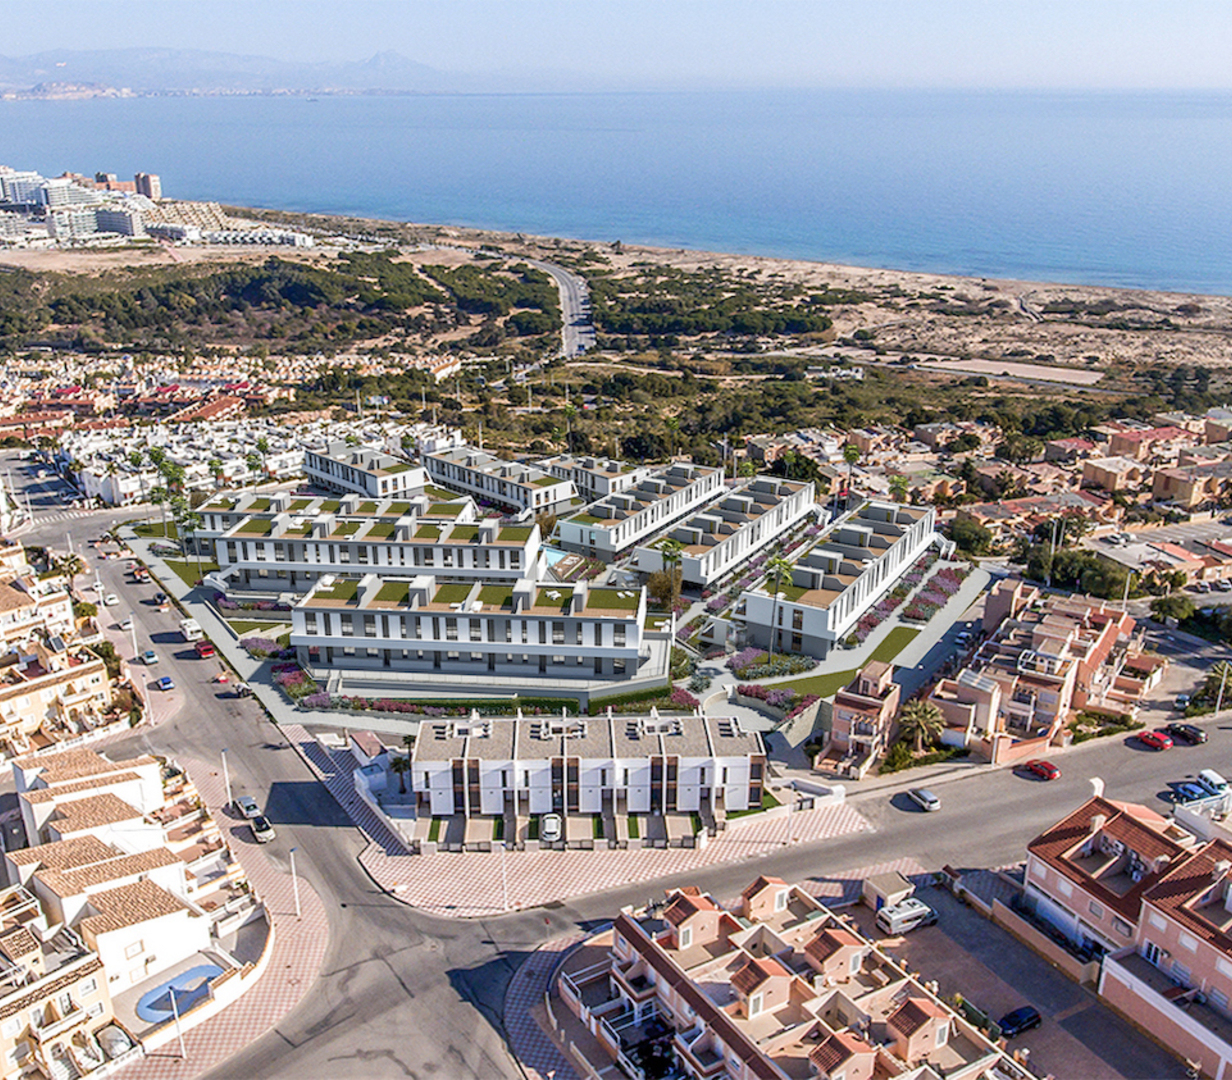 Apartments by the beach and sand dunes of Carabassi on the Costa Blanca